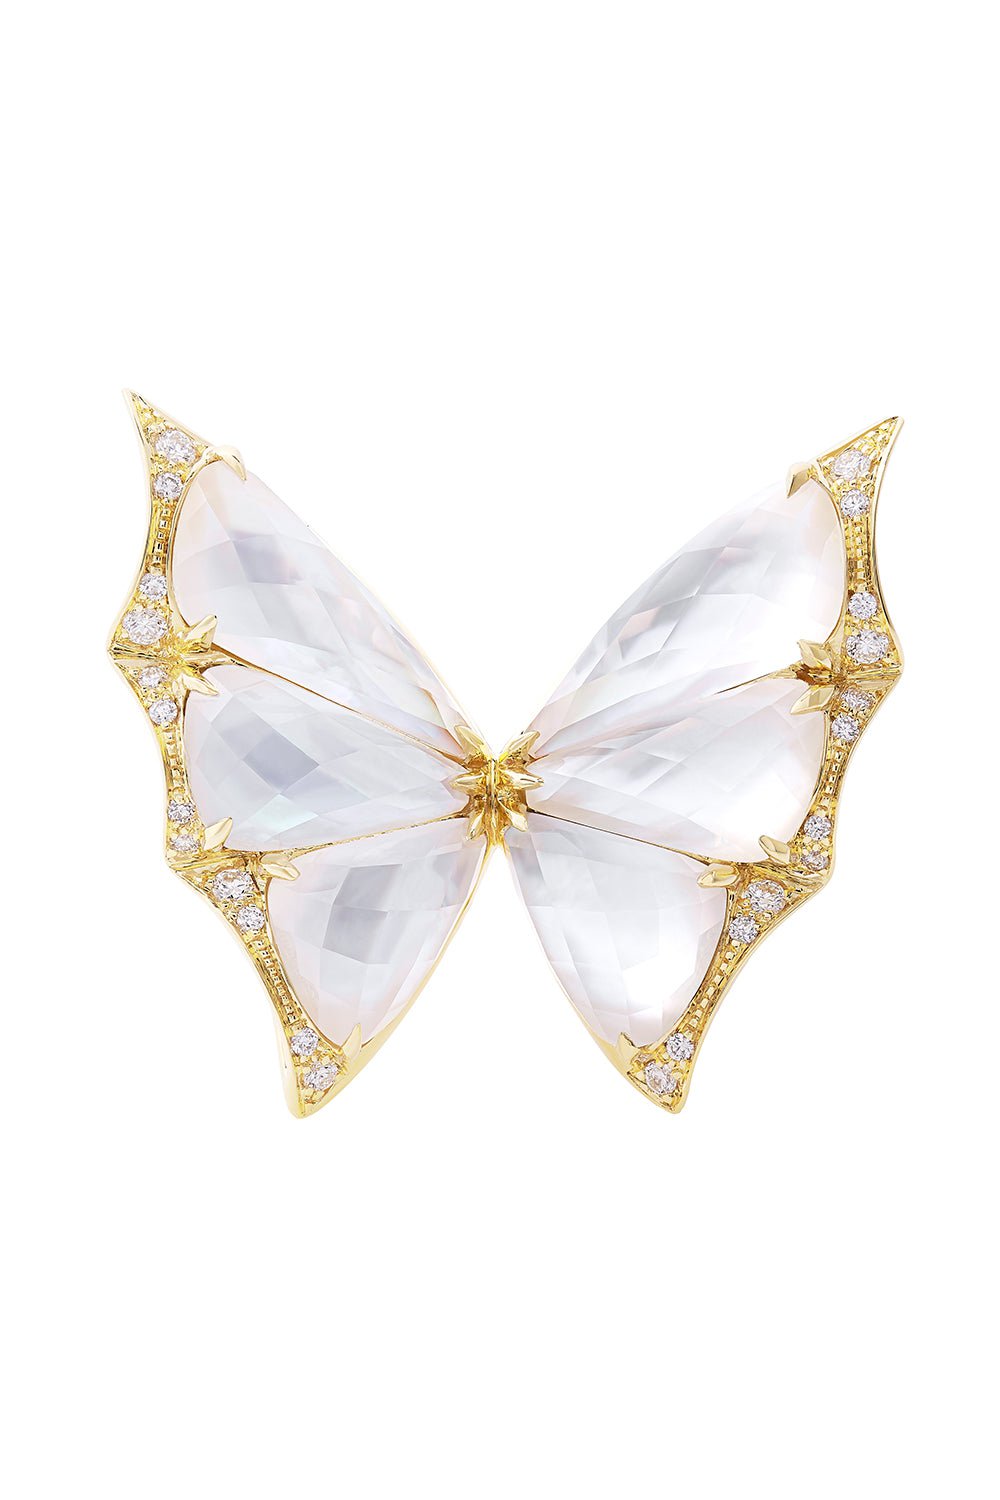 STEPHEN WEBSTER-Fly By Night Large Cocktail Ring-YELLOW GOLD